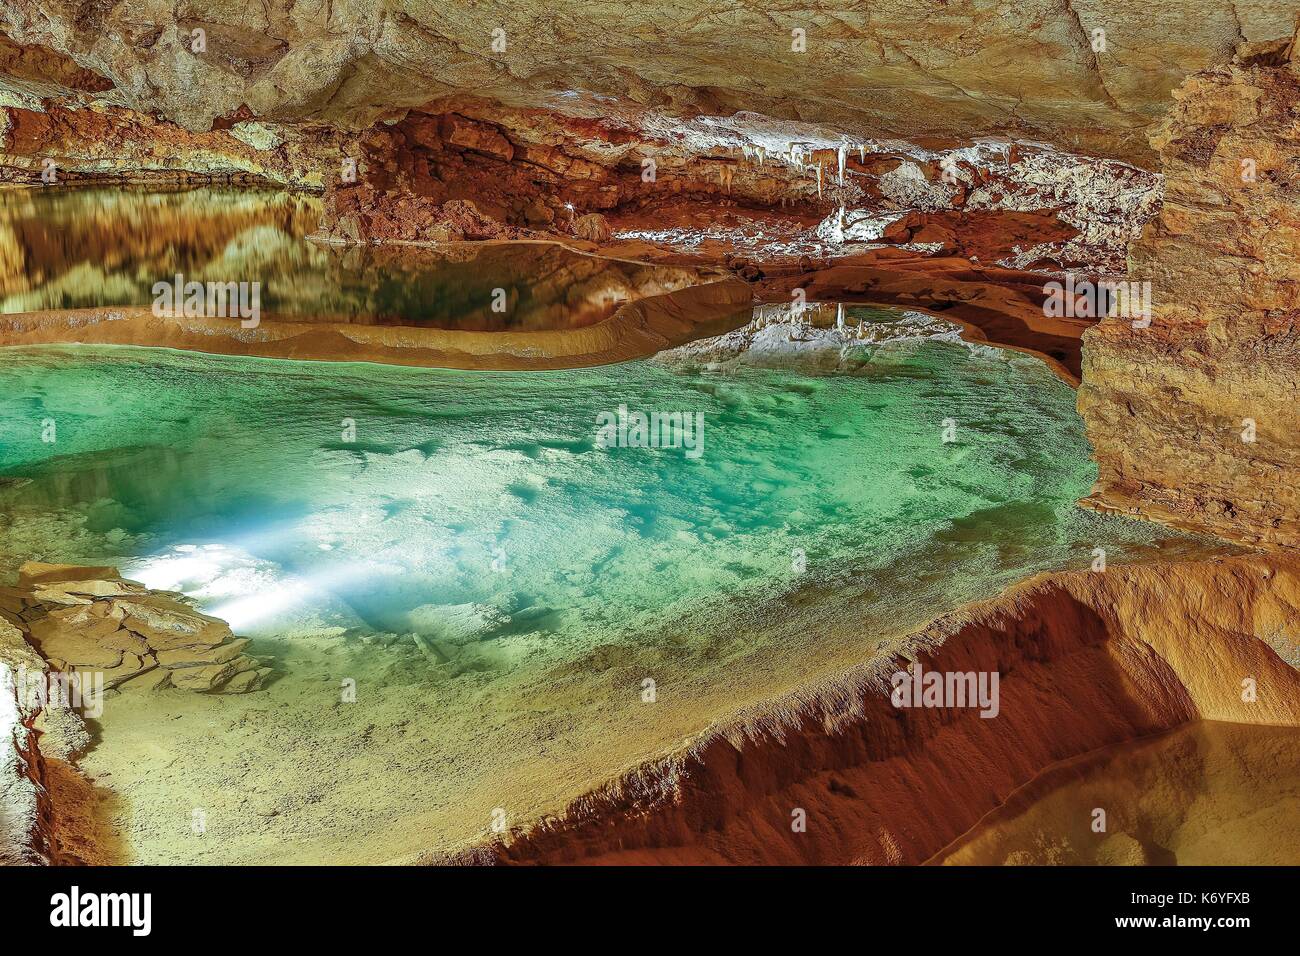 France, Lot, listed at Great Tourist Sites in Midi Pyrenees, Padirac, Padirac gulf, Natural regional park Causses du Quercy, gours lit in green at the bottom of the cave Stock Photo